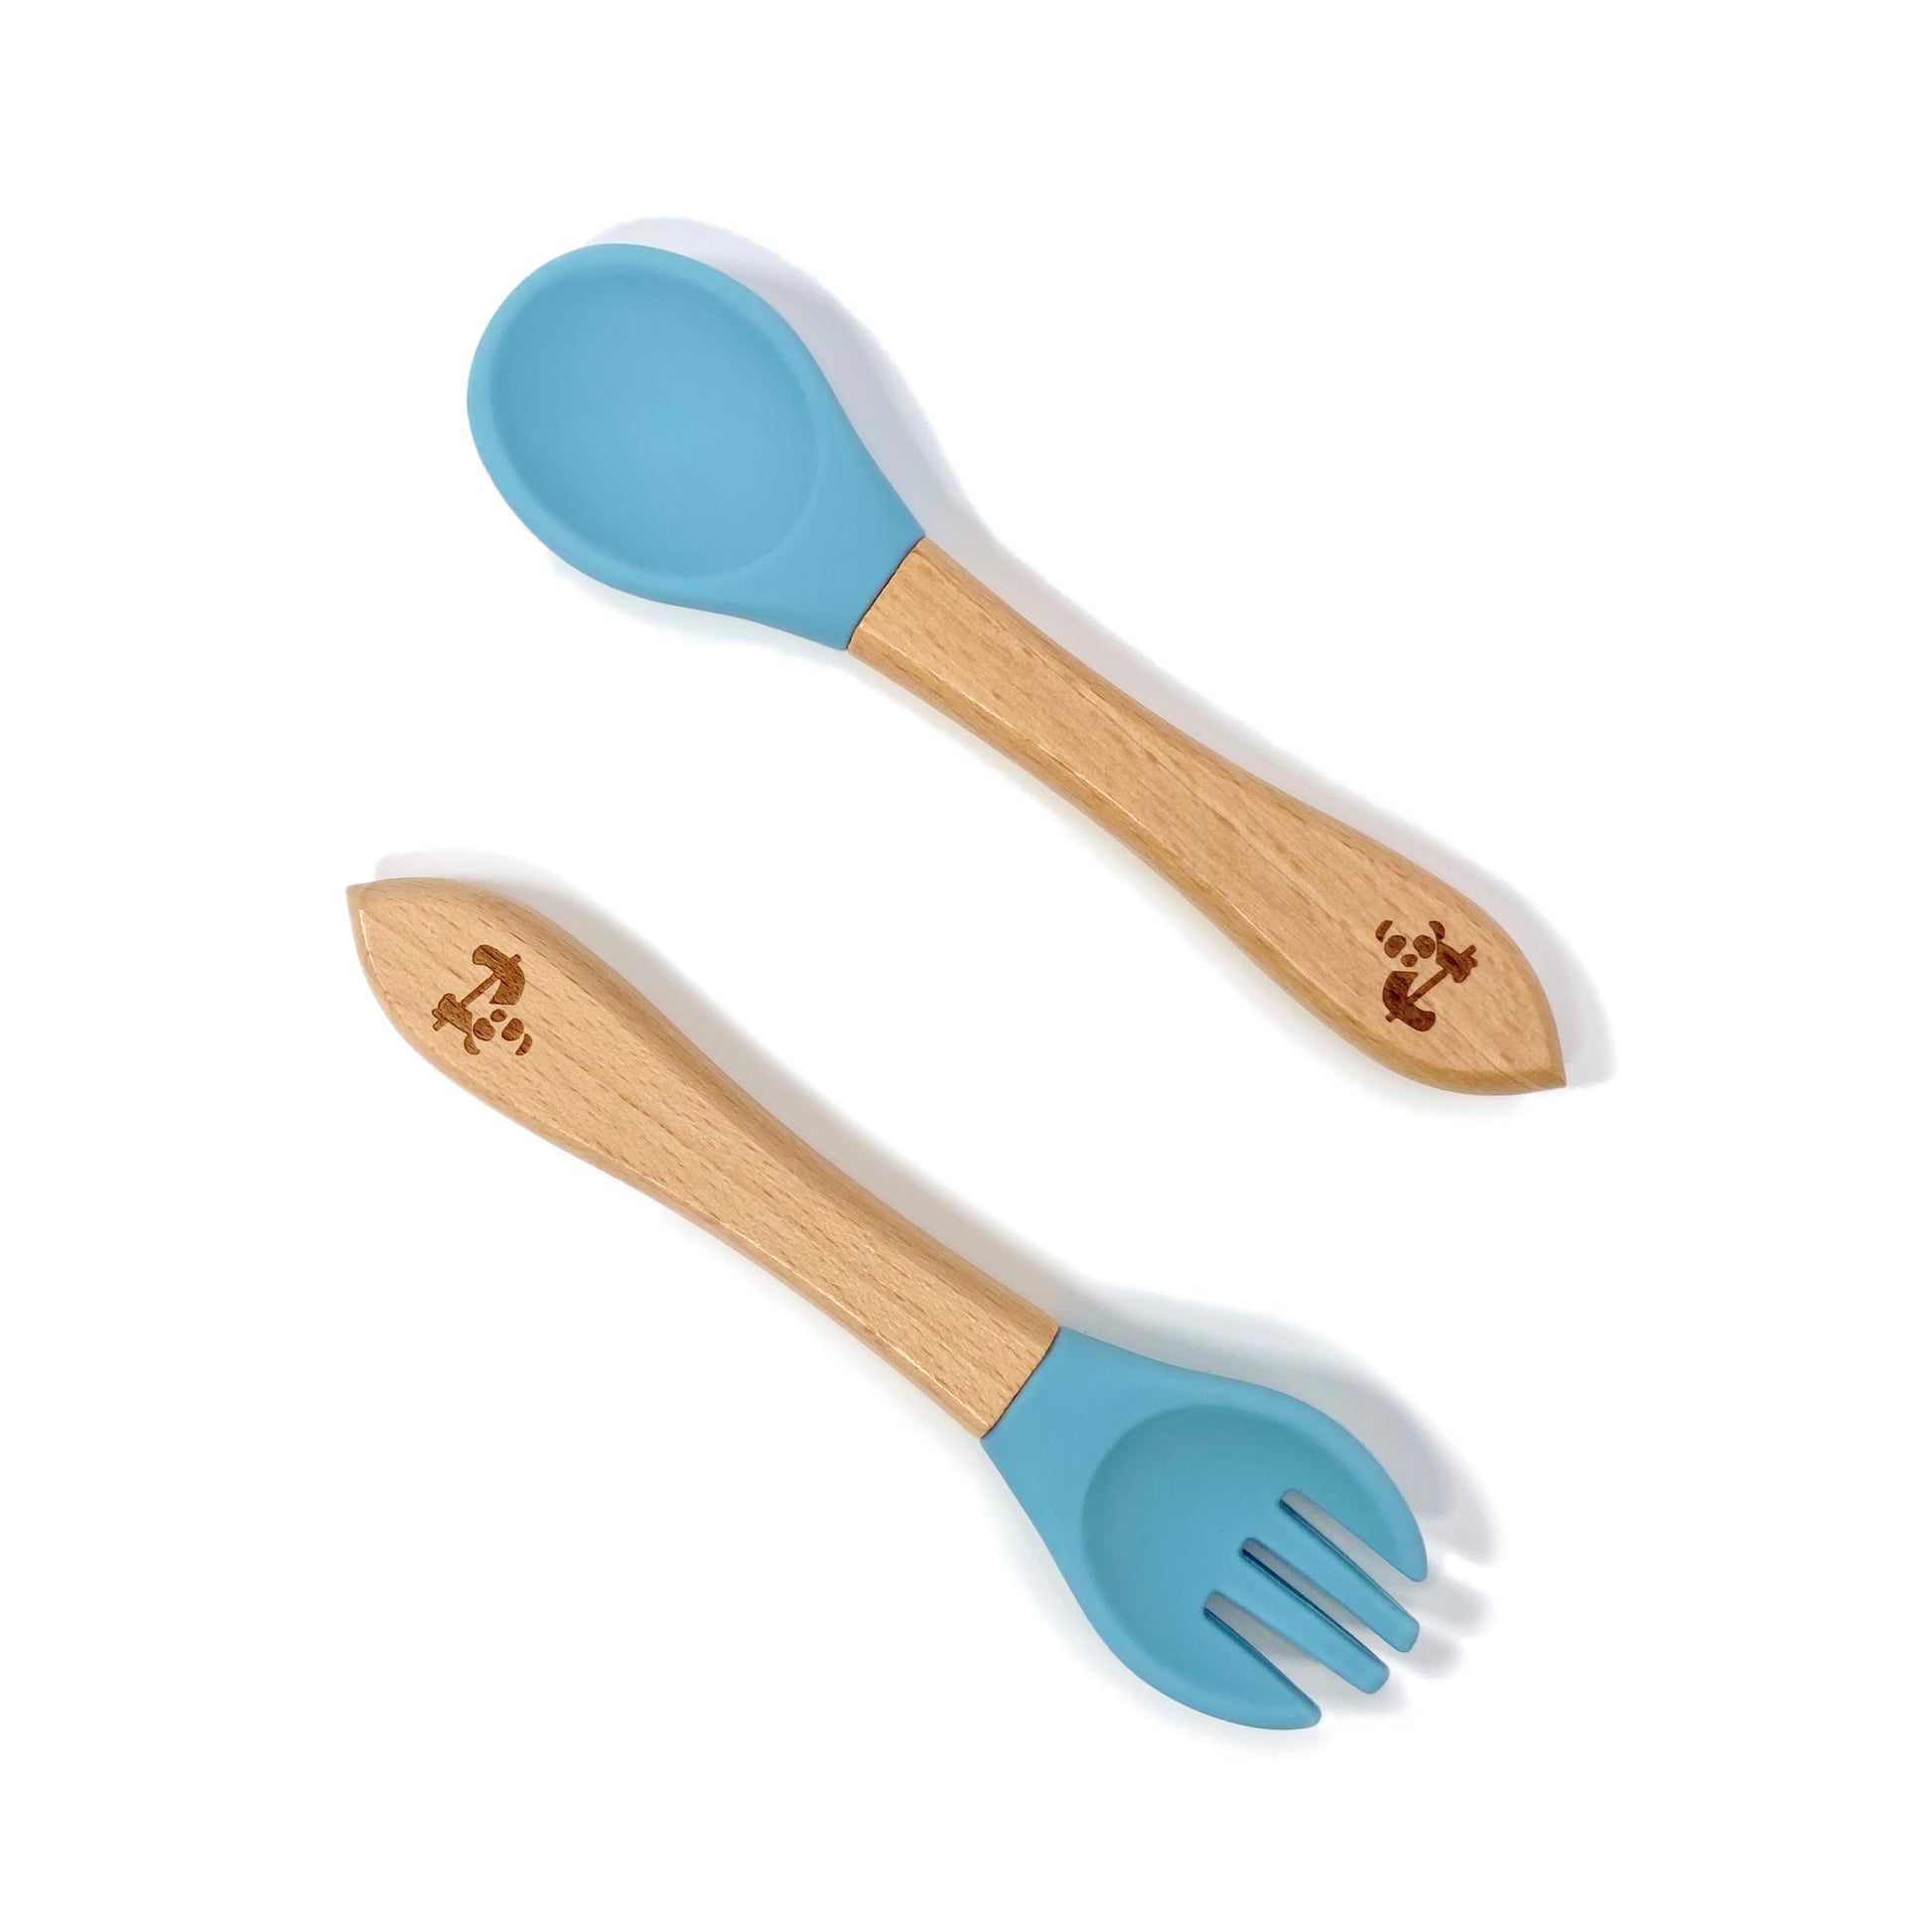 A set of children’s bamboo and silicone cutlery, in a sky blue colour.